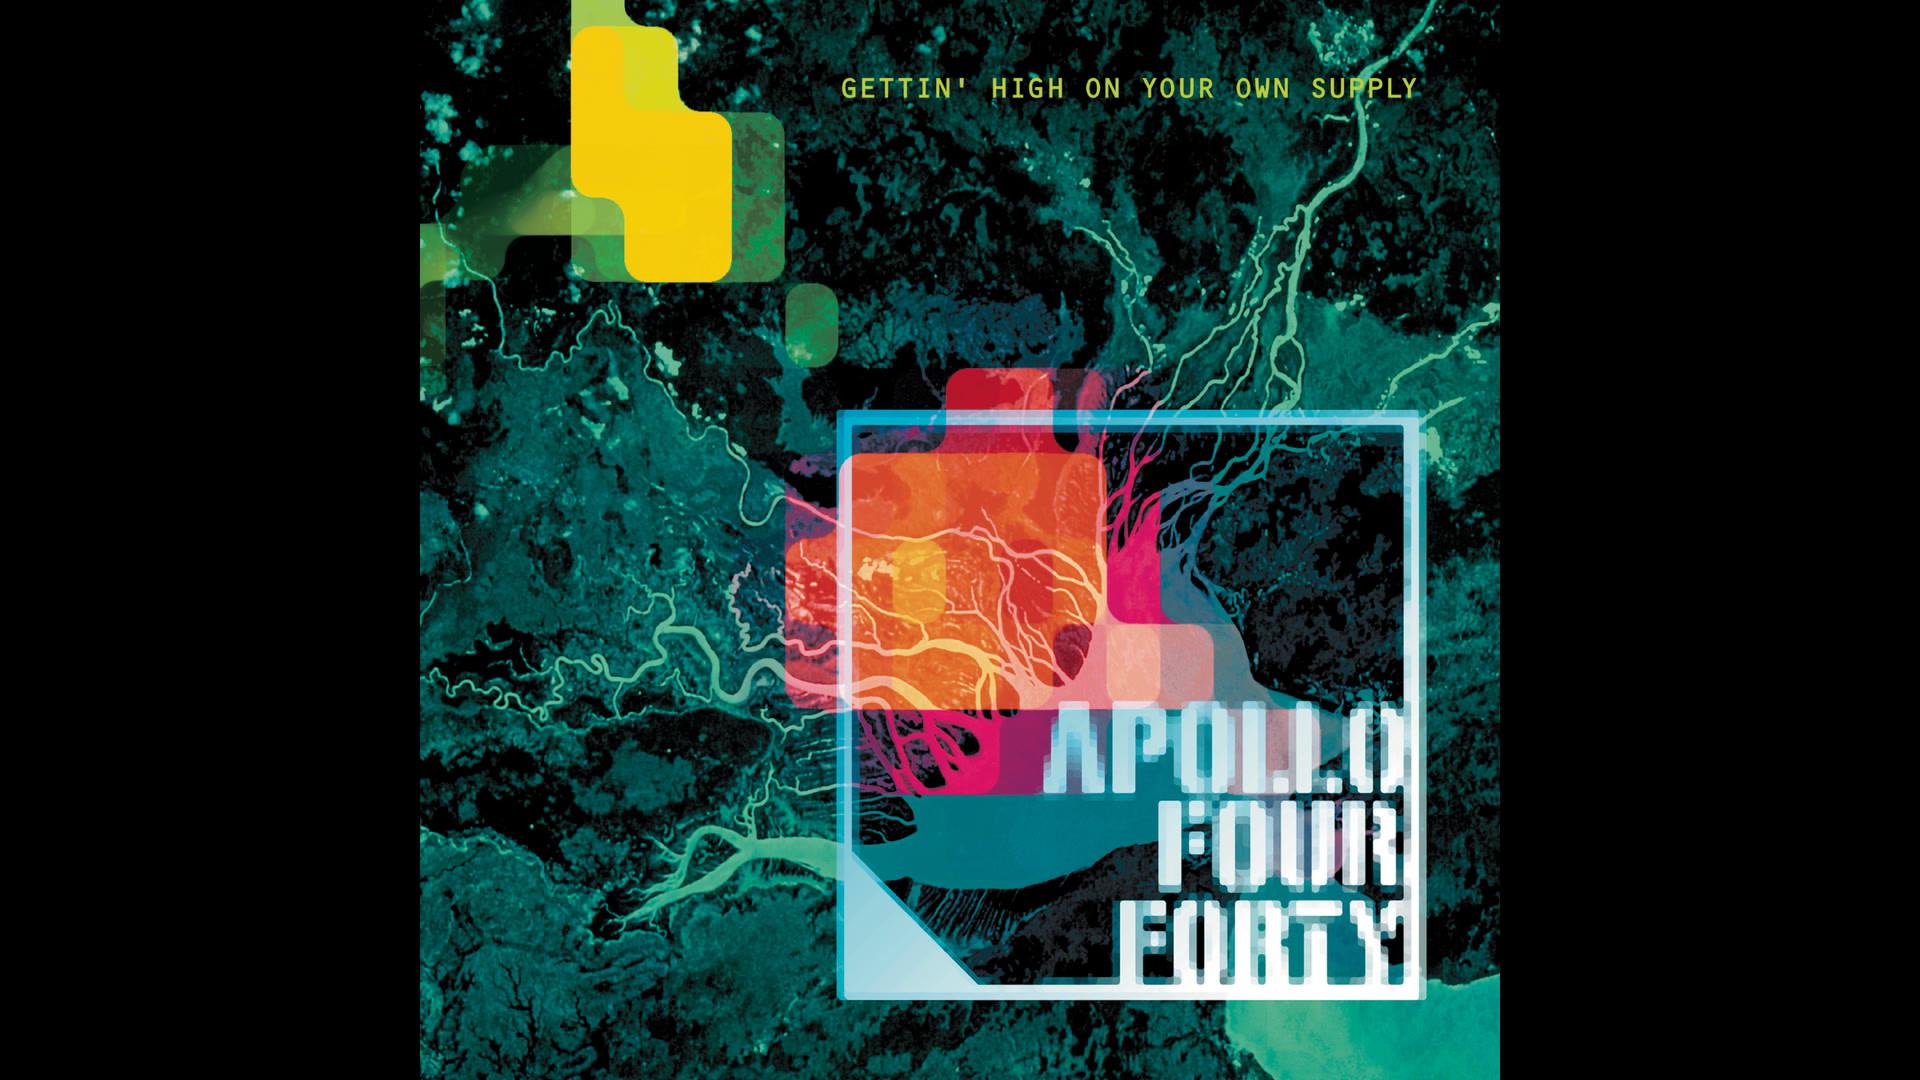 Apollo 440 - High on Your Own Supply (Instrumental Version) [Audio]